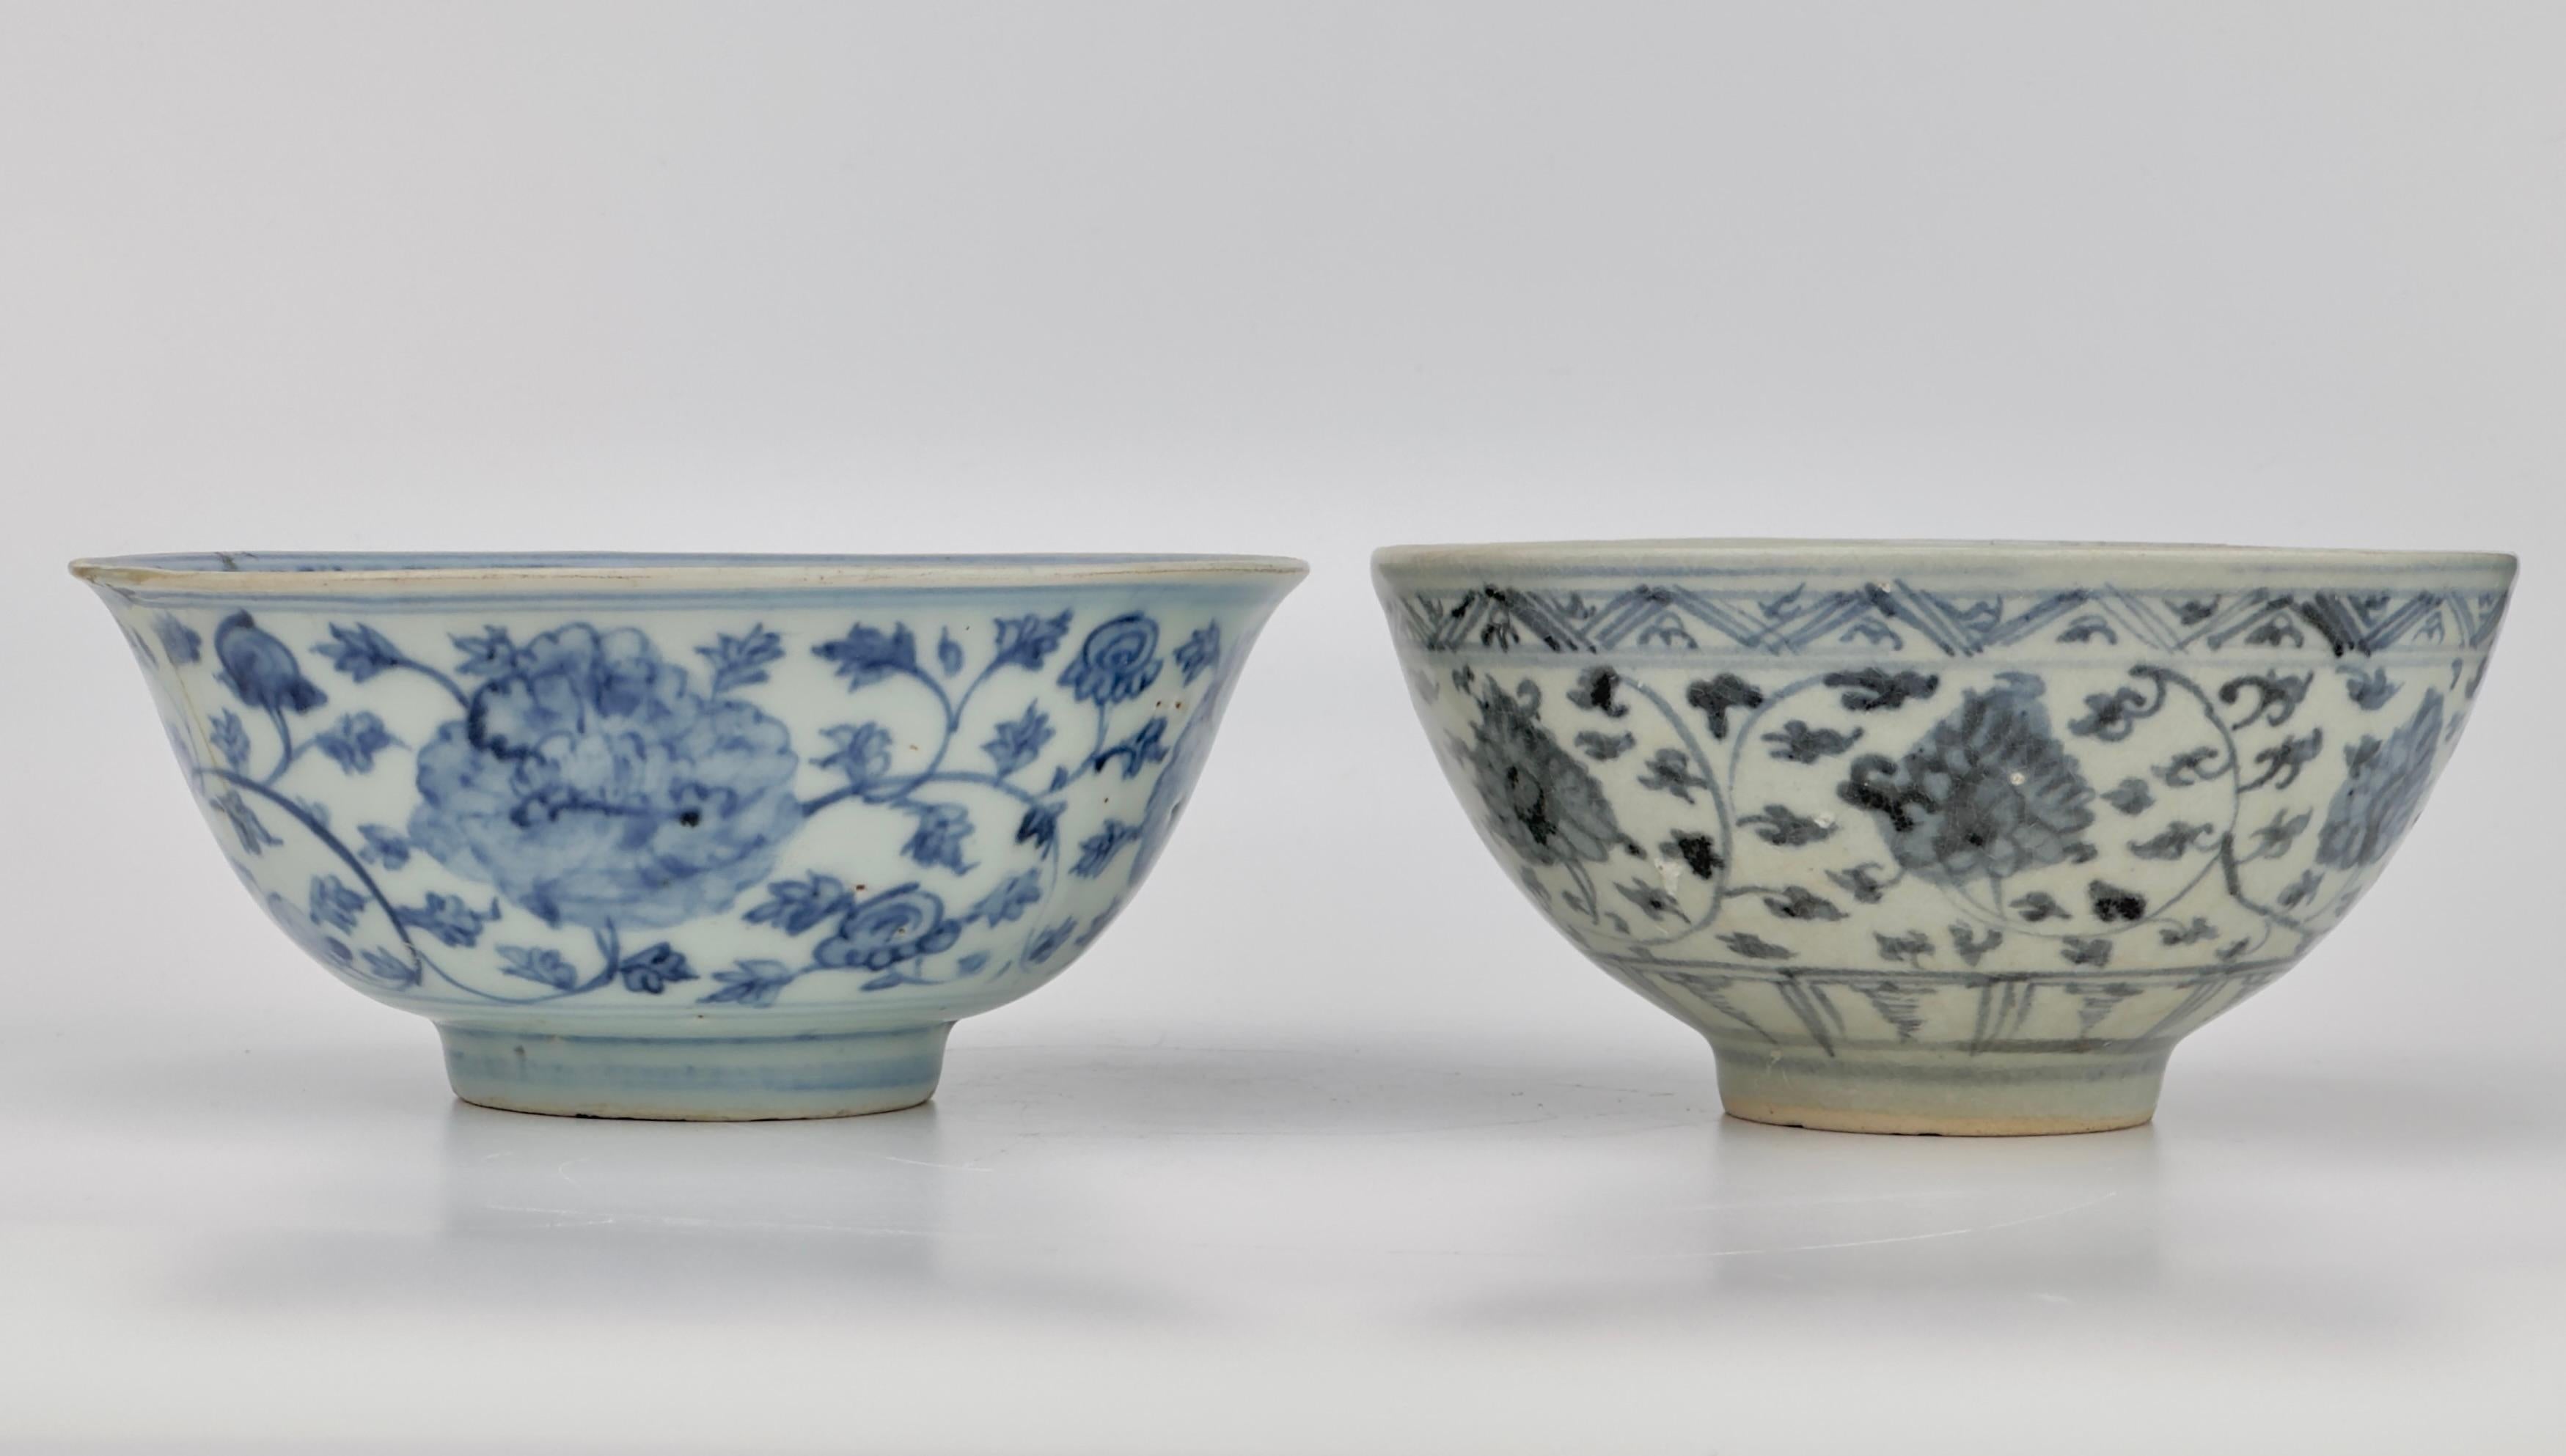 Two Bowls from the Ming dynasty cargo. A piece identical pattern is included on page 119 of the title 'The Age of Discovery: Asian Ceramics Found Along the Maritime Silk Road'.

Period: Ming Dynasty (15th century)
Type: Bowl
Medium : Blue and